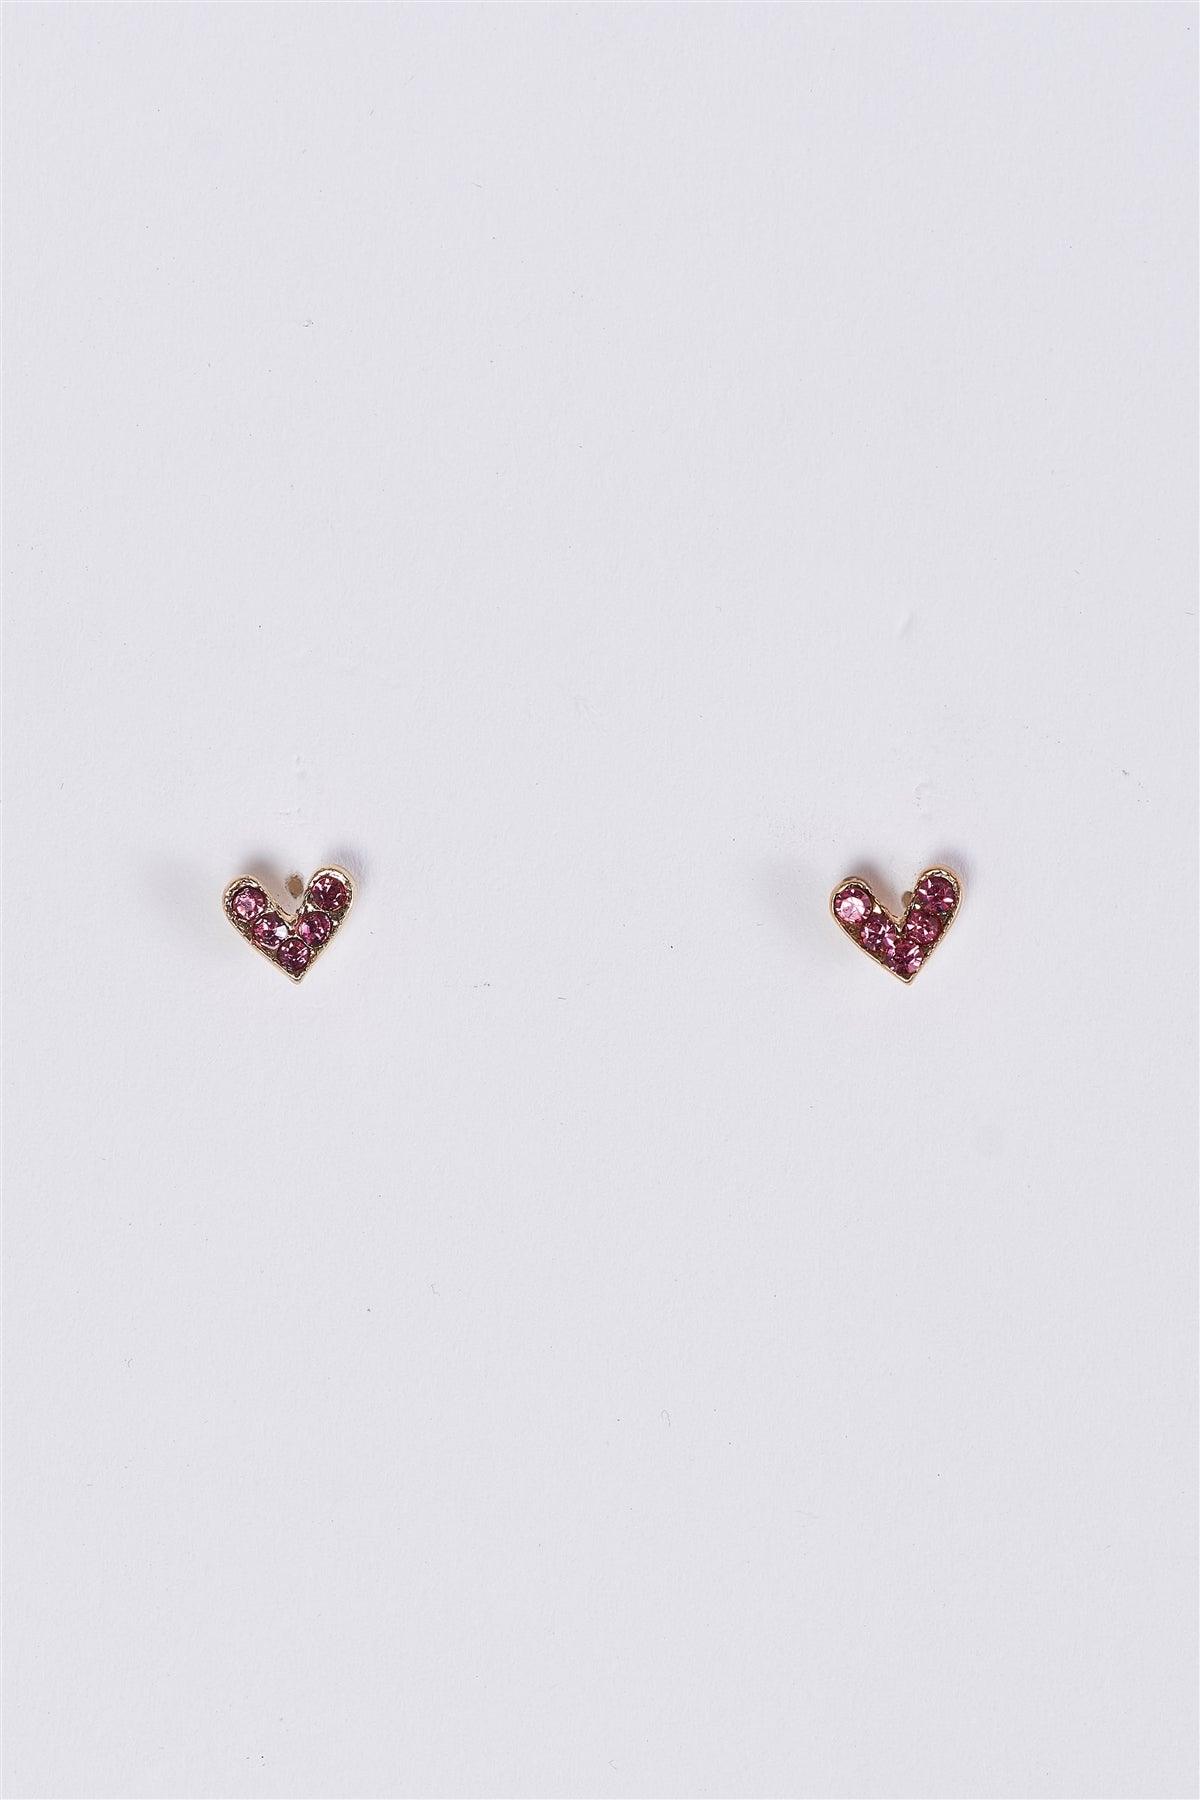 Pixelated Love Small Pink & Gold Faux Diamonds Incrusted Heart Stud Earrings /3 Pairs